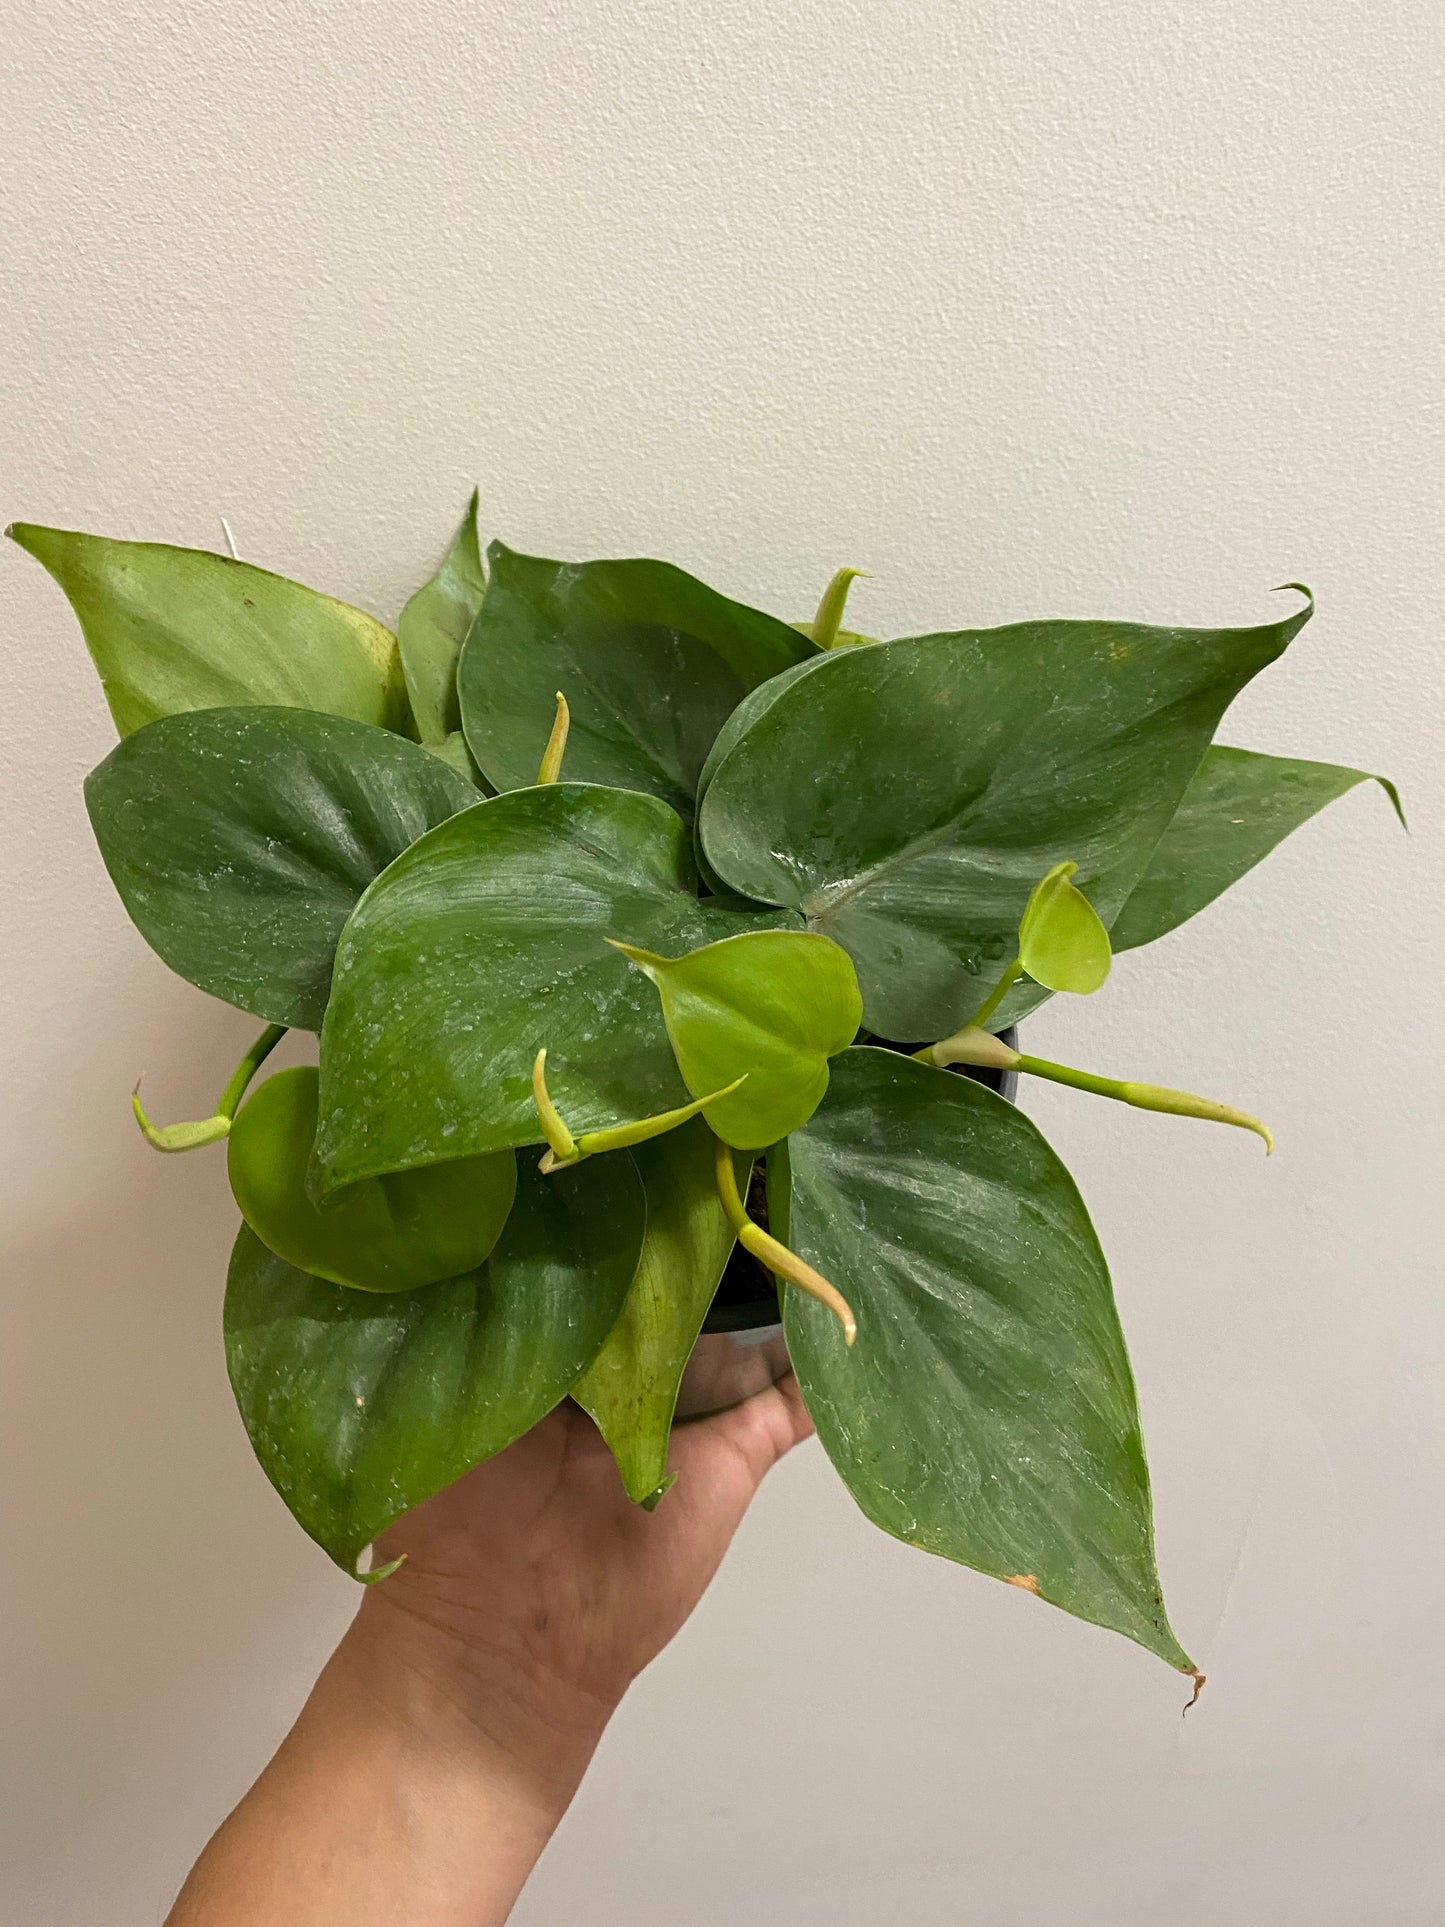 Philodendron Cordatum - Heart Leaf Philodendron